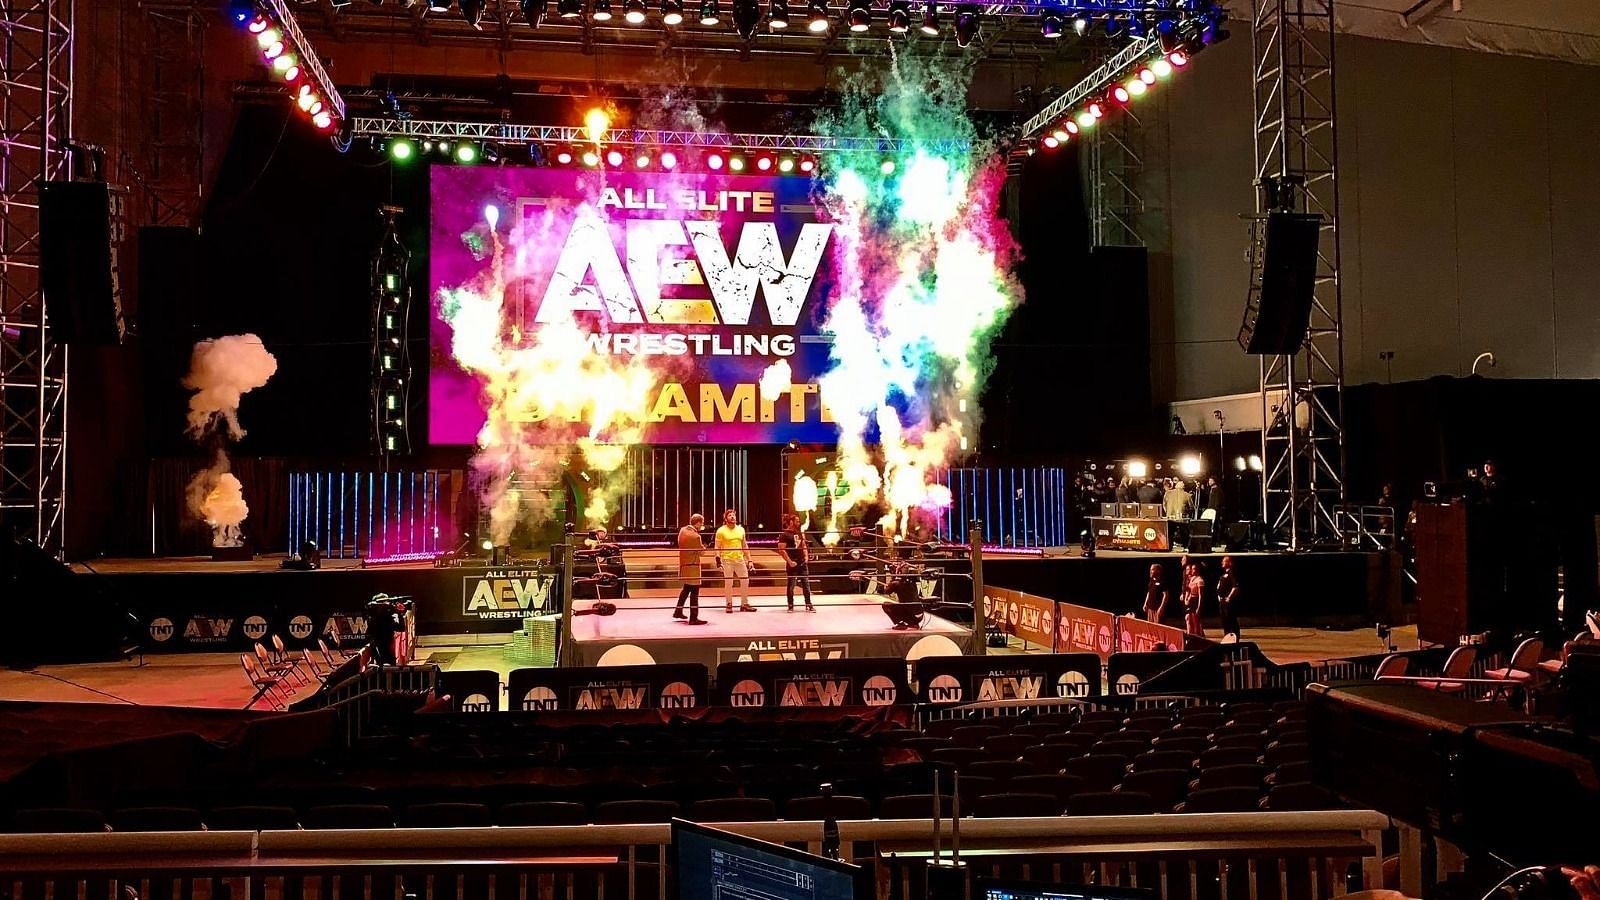 A former AEW star reveals he was at a major promotion recently